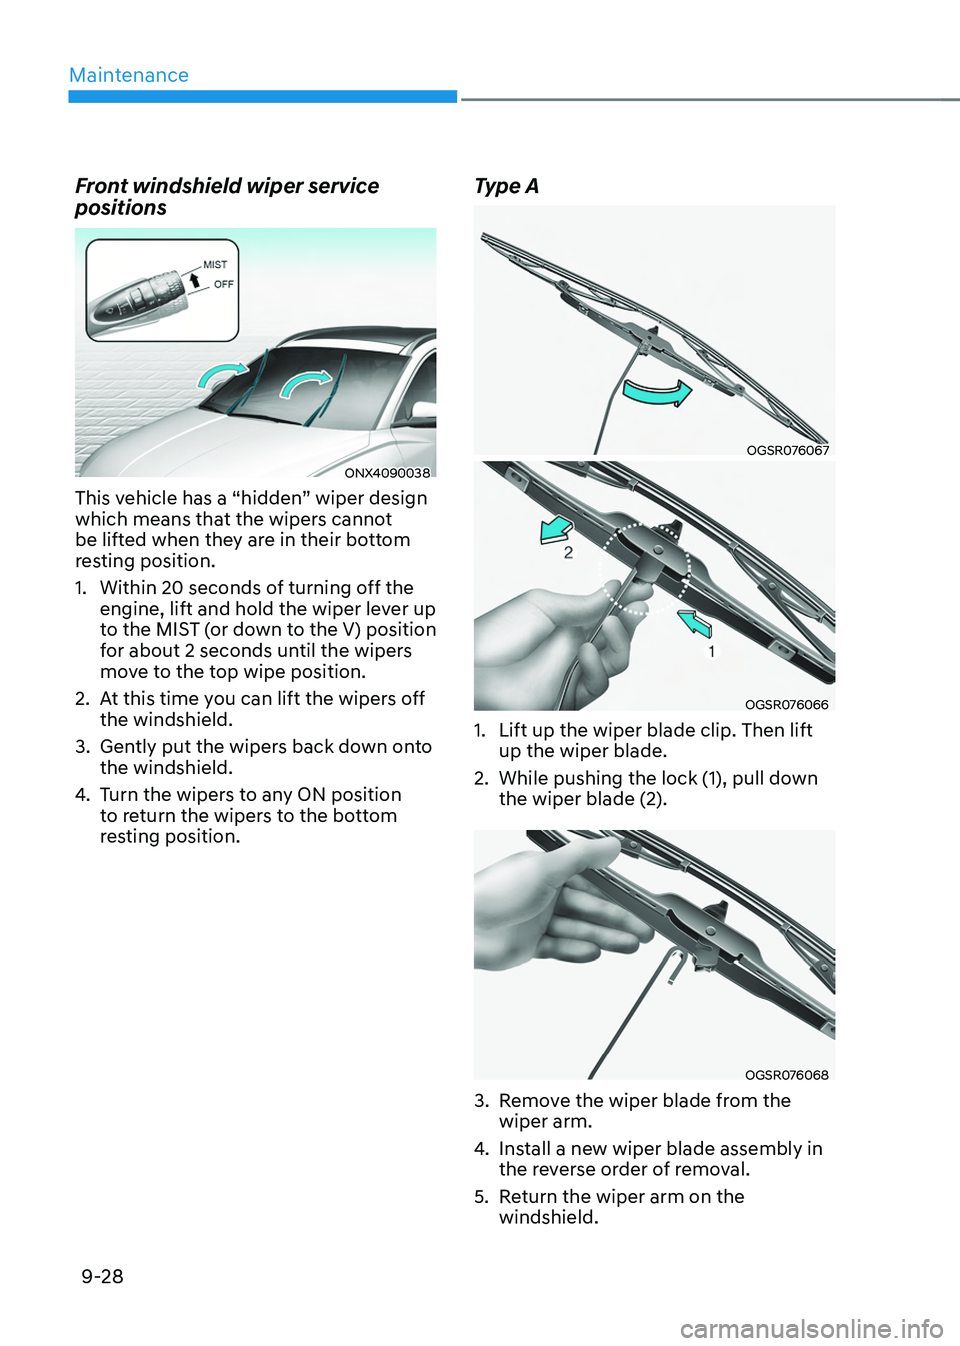 HYUNDAI TUCSON 2022  Owners Manual Maintenance
9-28
Front windshield wiper service 
positions
ONX4090038
This vehicle has a “hidden” wiper design 
which means that the wipers cannot 
be lifted when they are in their bottom 
resting